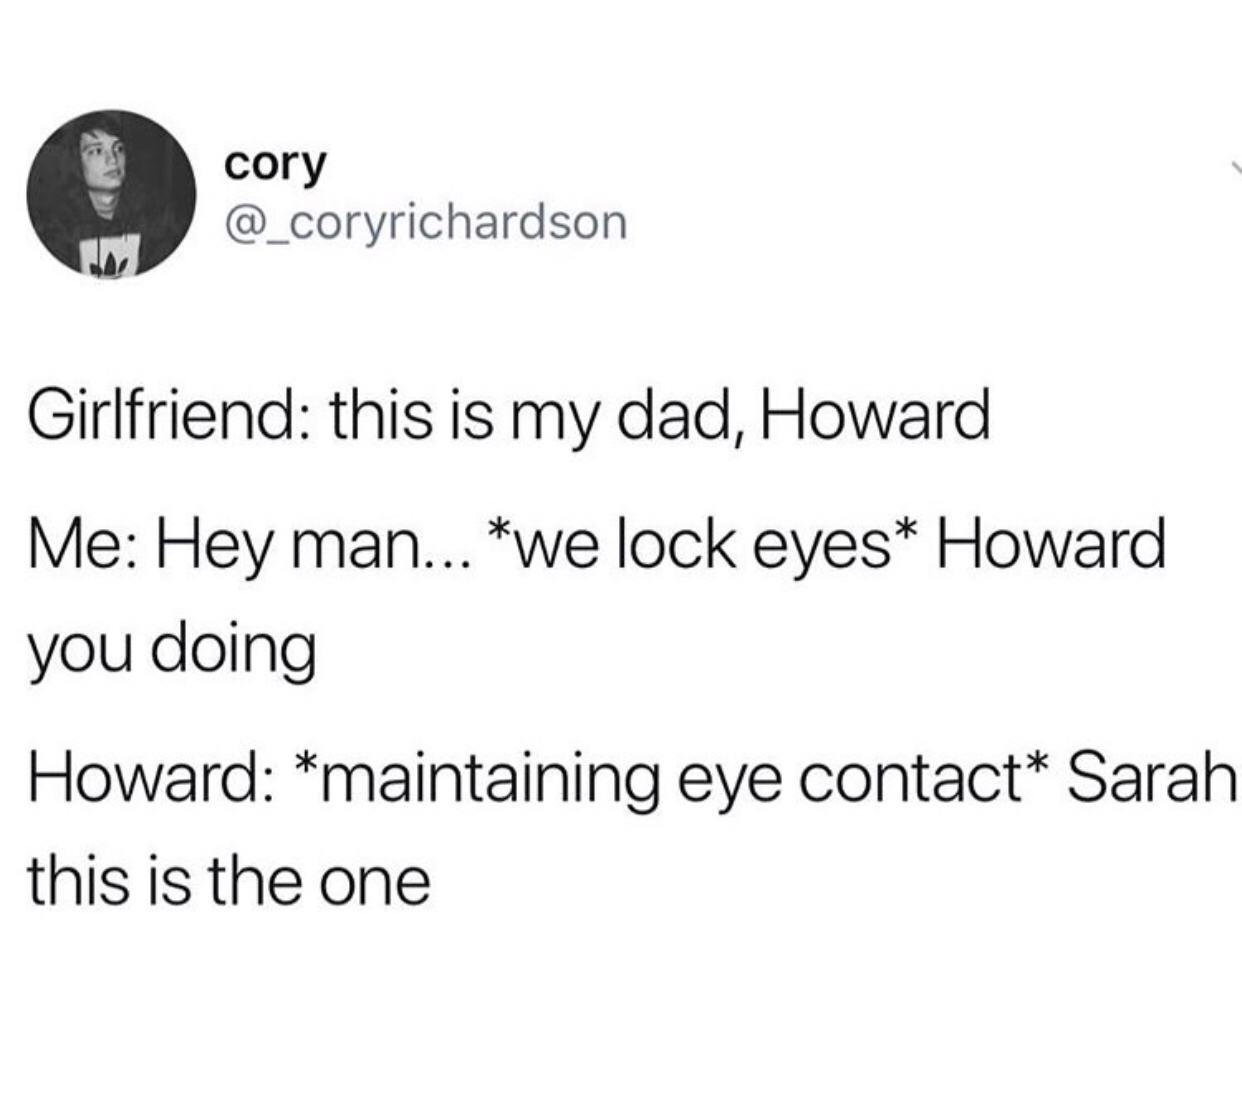 ducking meme - cory Girlfriend this is my dad, Howard Me Hey man... we lock eyes Howard you doing Howard maintaining eye contact Sarah this is the one